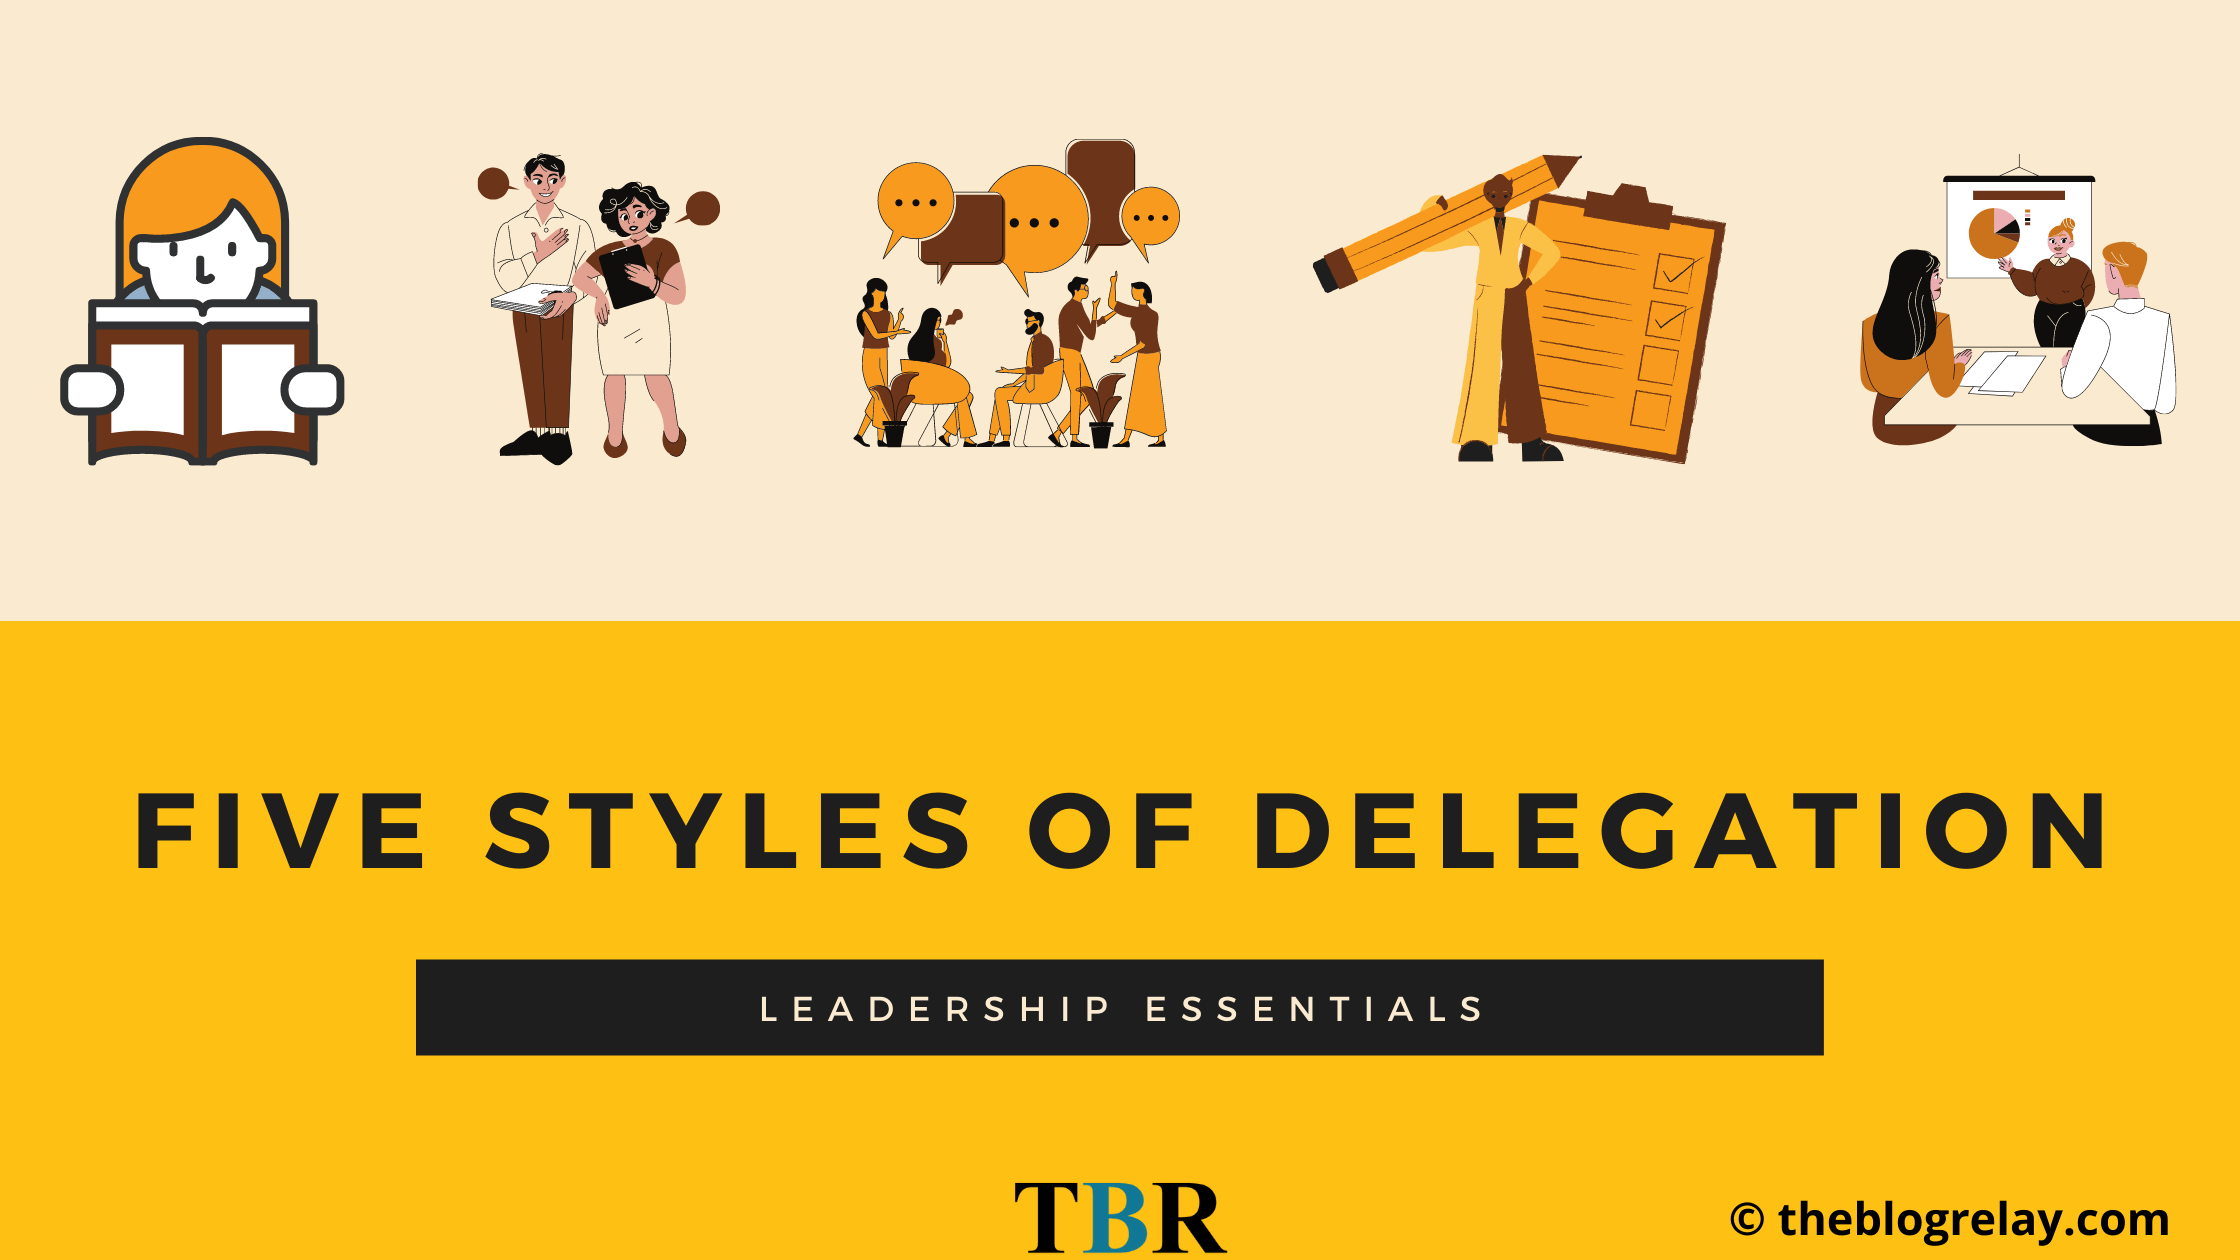 5 types of delegation: What is your style?